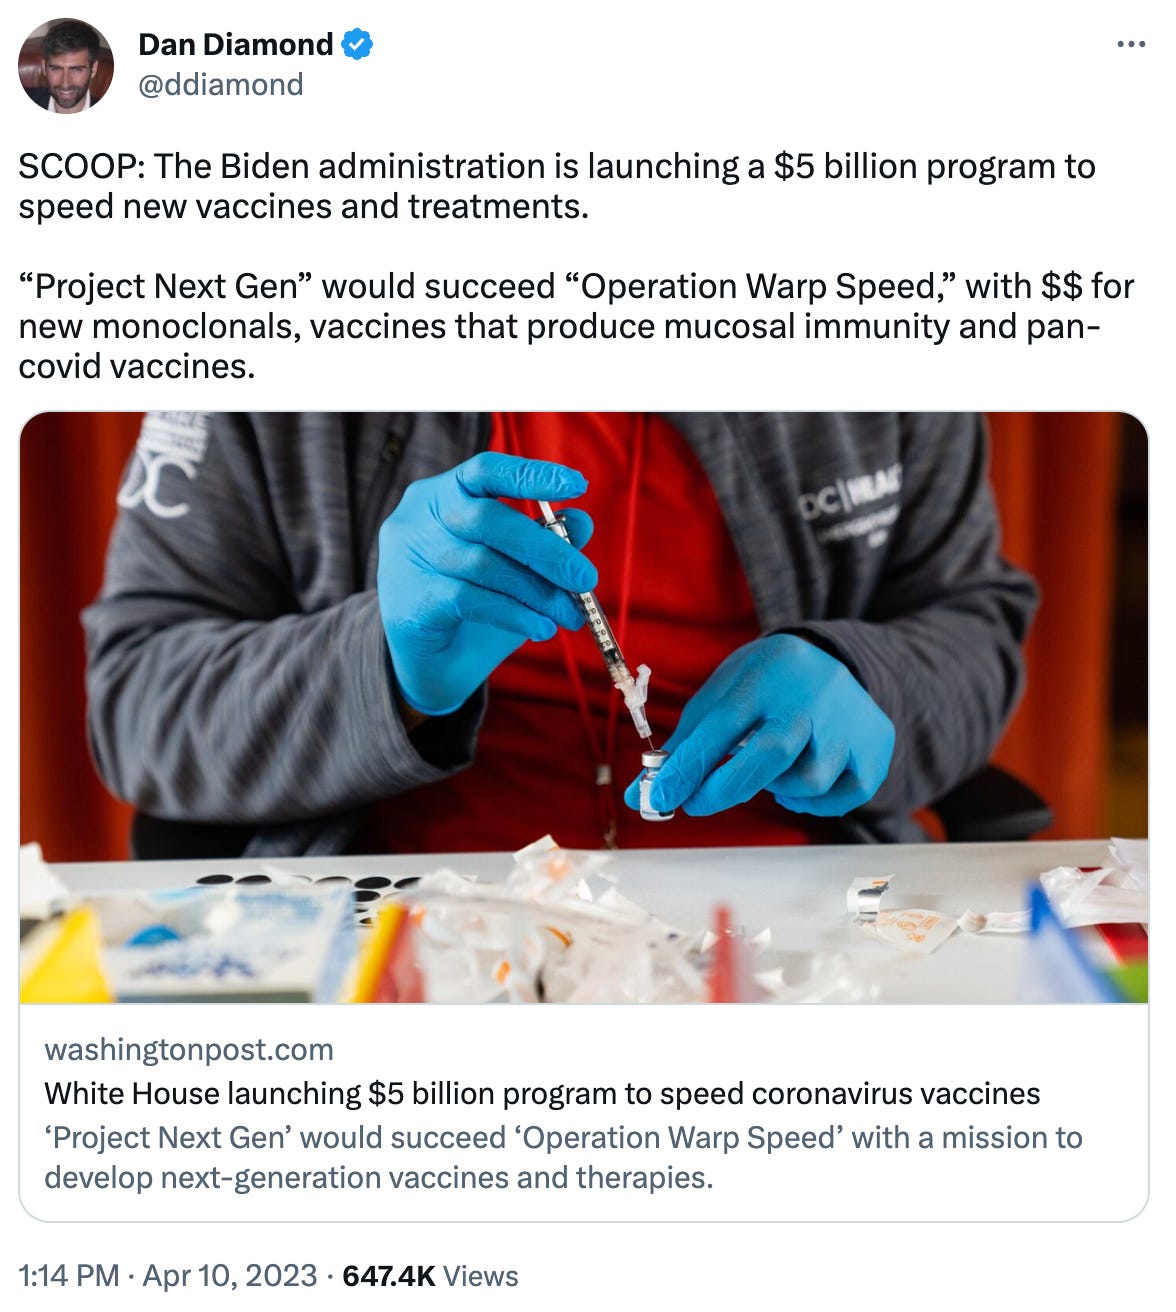 SCOOP: The Biden administration is launching a $5 billion program to speed new vaccines and treatments.  “Project Next Gen” would succeed “Operation Warp Speed,” with $$ for new monoclonals, vaccines that produce mucosal immunity and pan-covid vaccines. washingtonpost.com White House launching $5 billion program to speed coronavirus vaccines ‘Project Next Gen’ would succeed ‘Operation Warp Speed’ with a mission to develop next-generation vaccines and therapies.